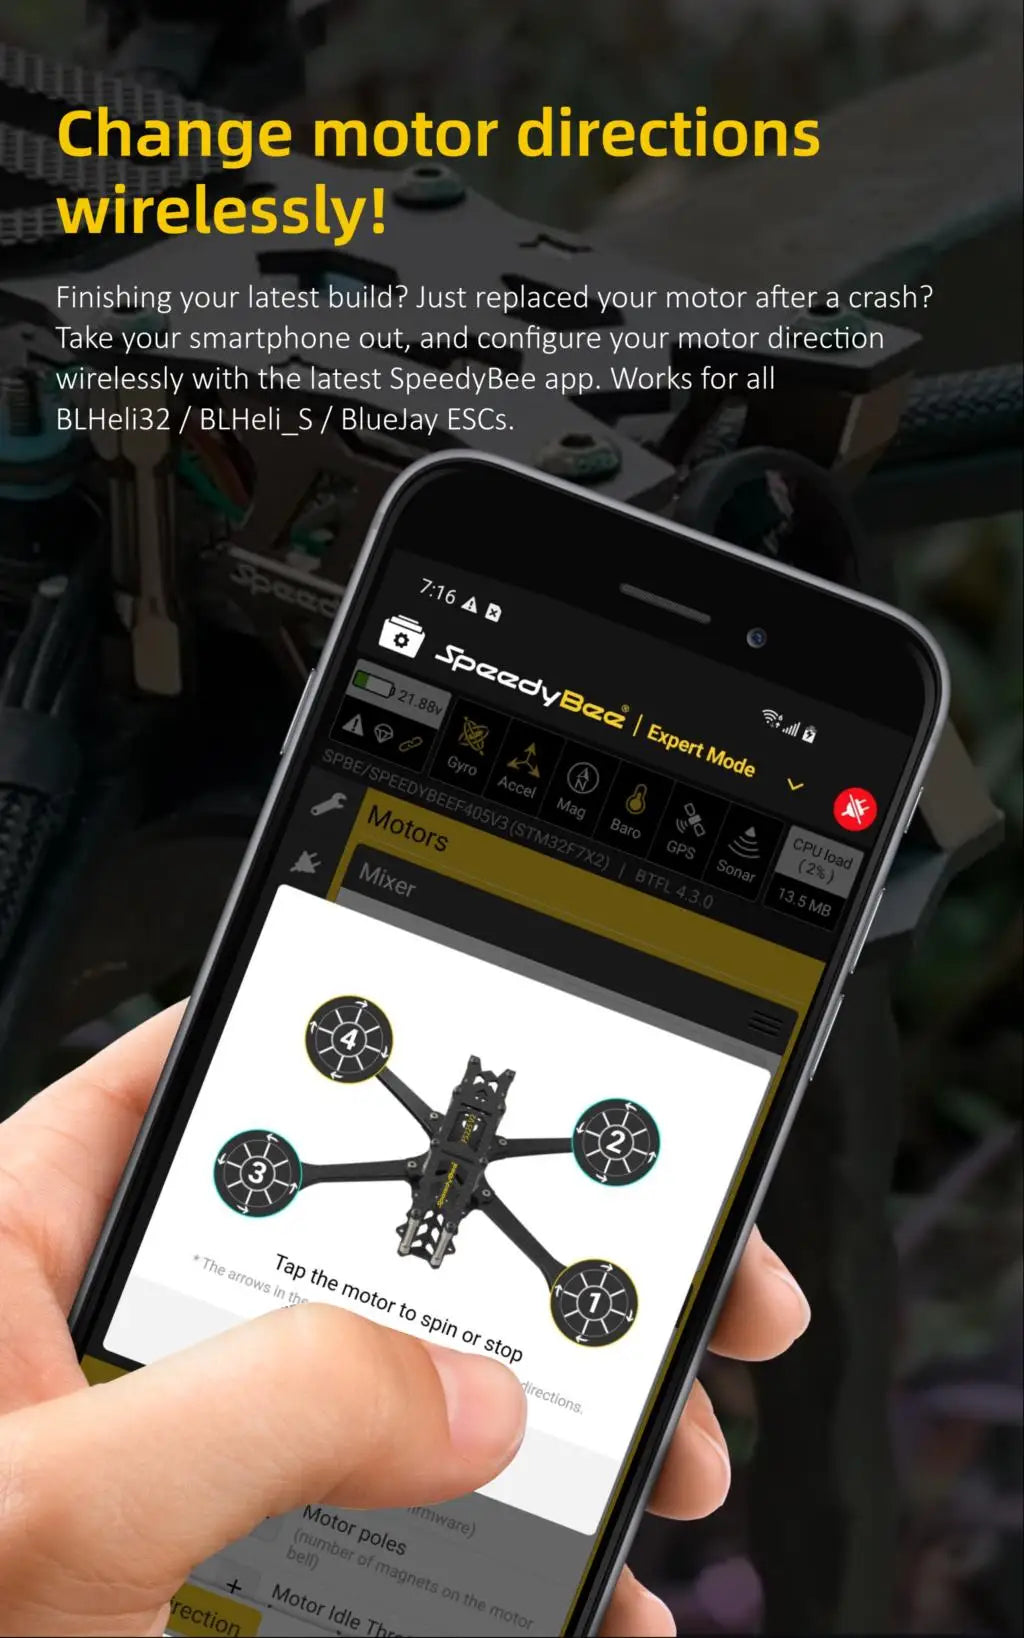 SpeedyBee F405 V3, speedybee app allows you to change motor directions wirelessly . works for all 